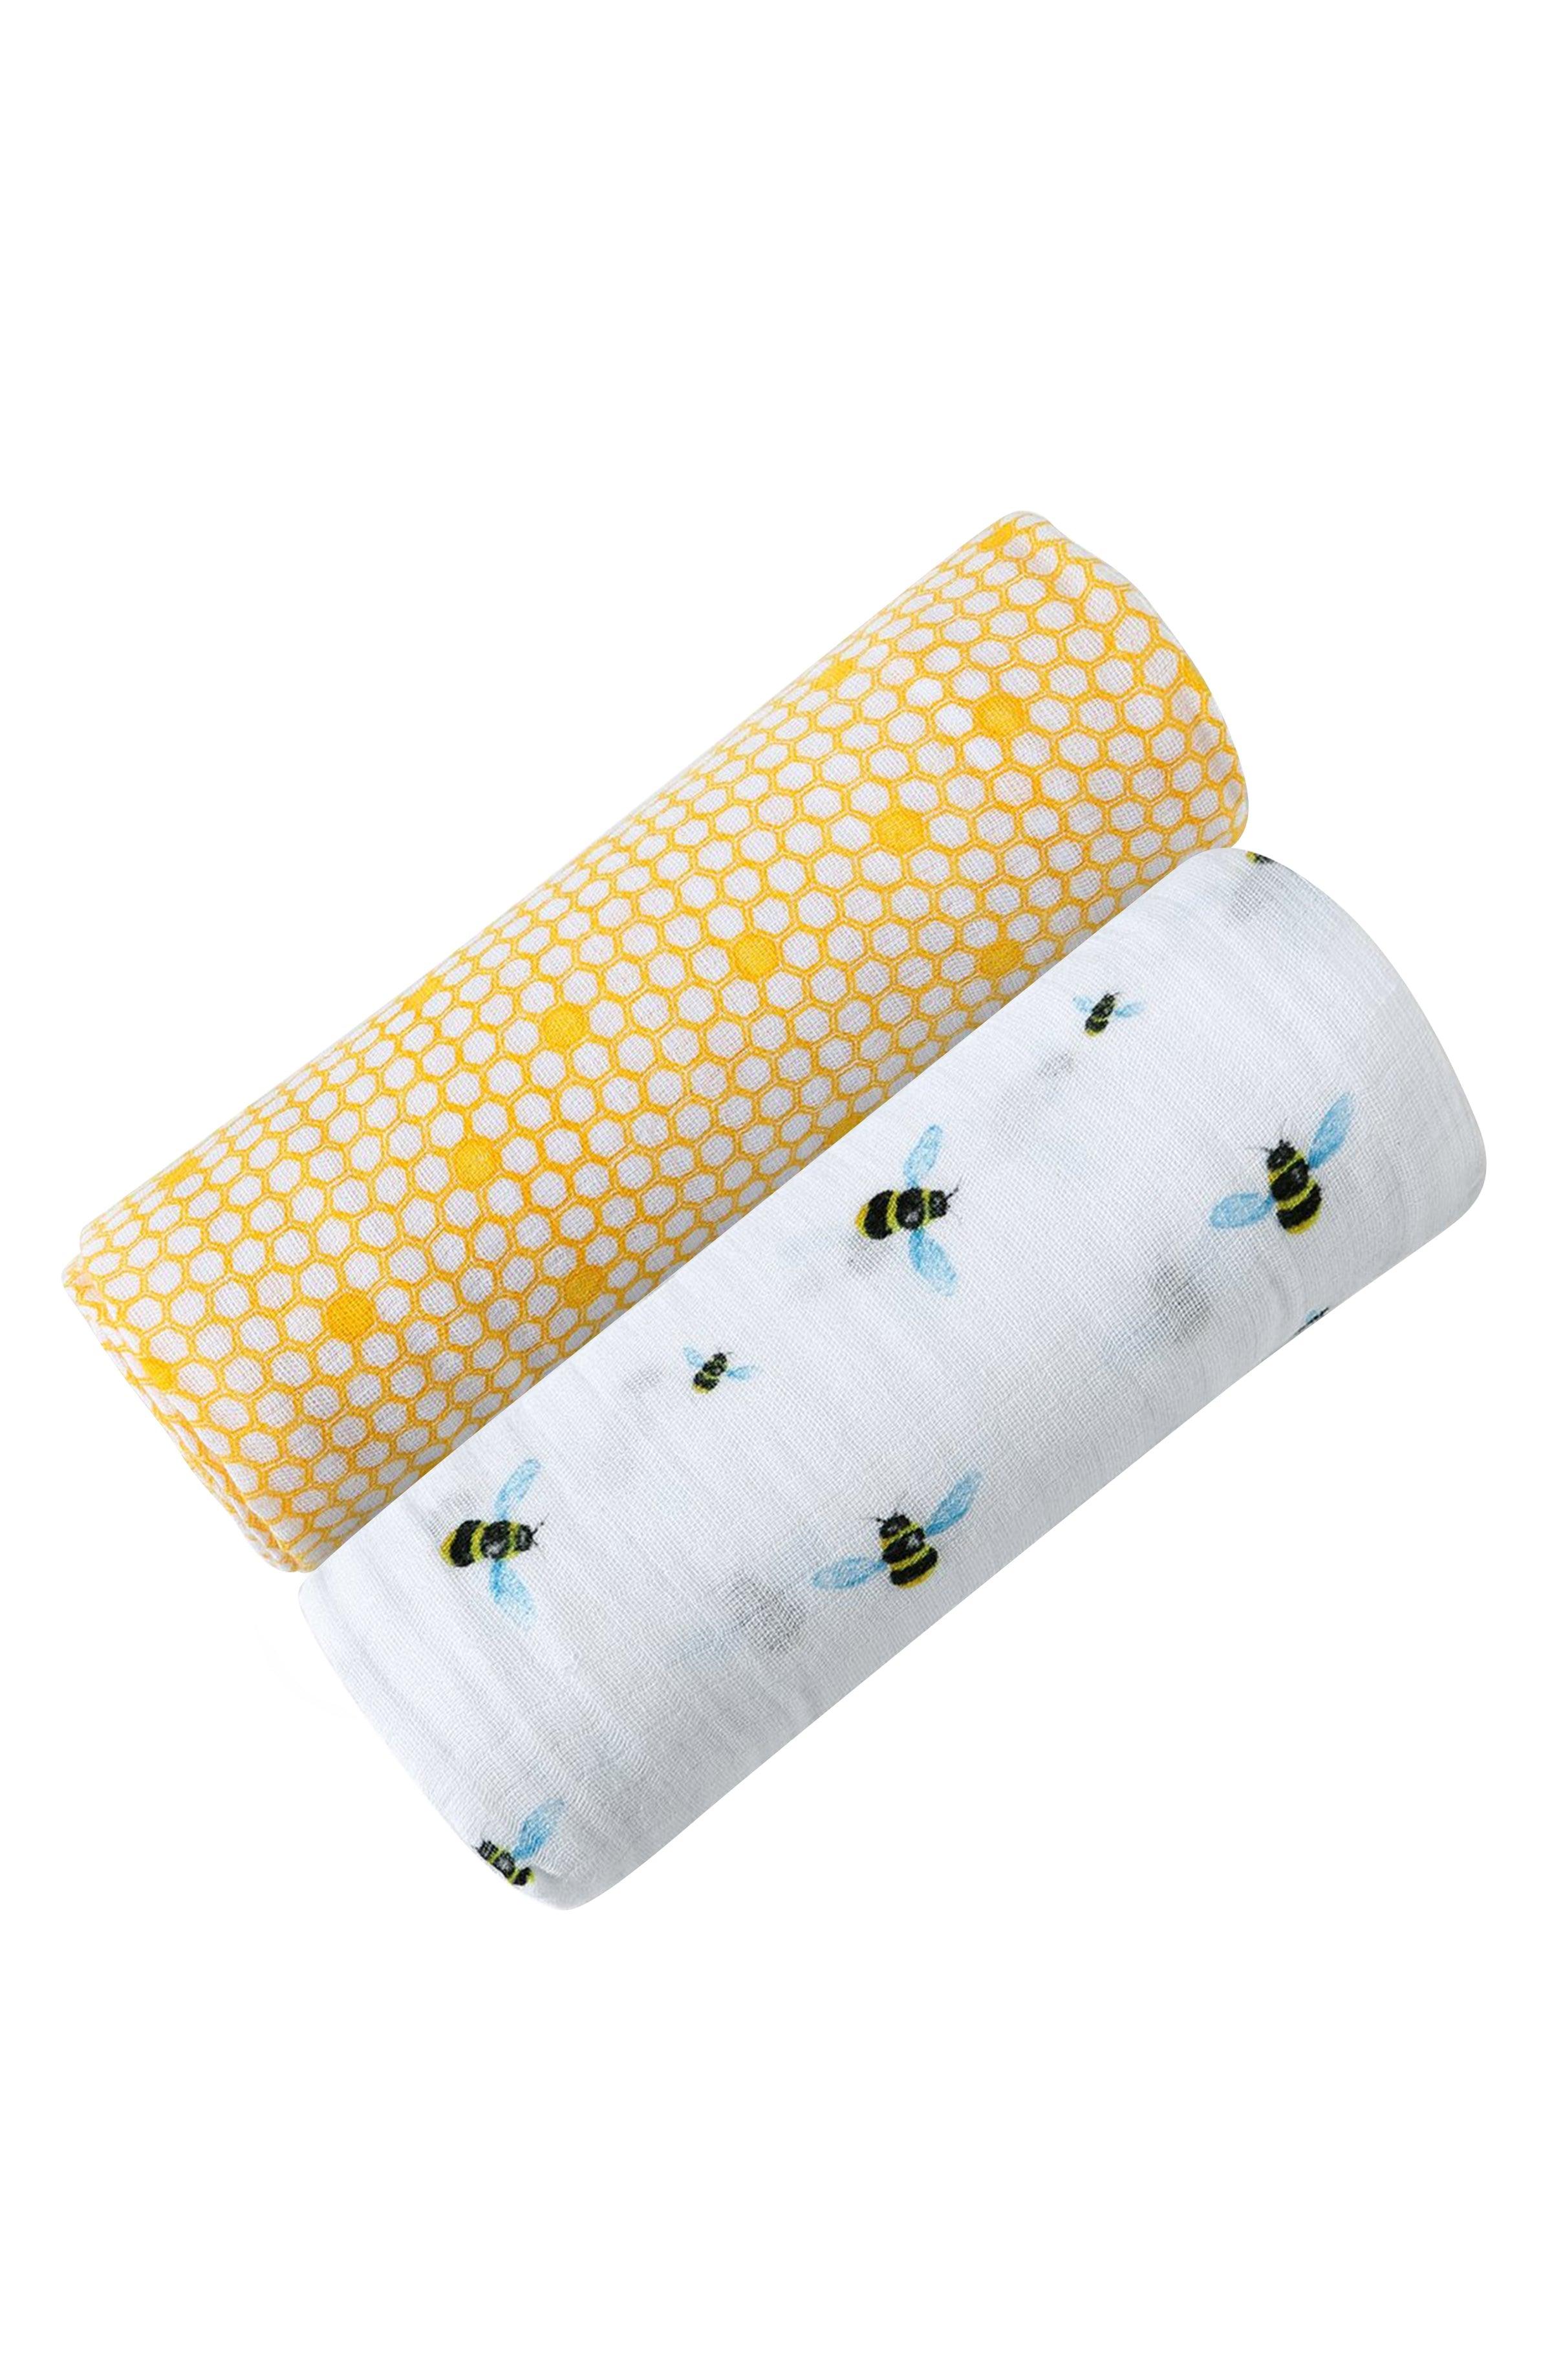 ORGANIC SWADDLE SET - BUSY BEES (Bee + Hive) - Why and Whale